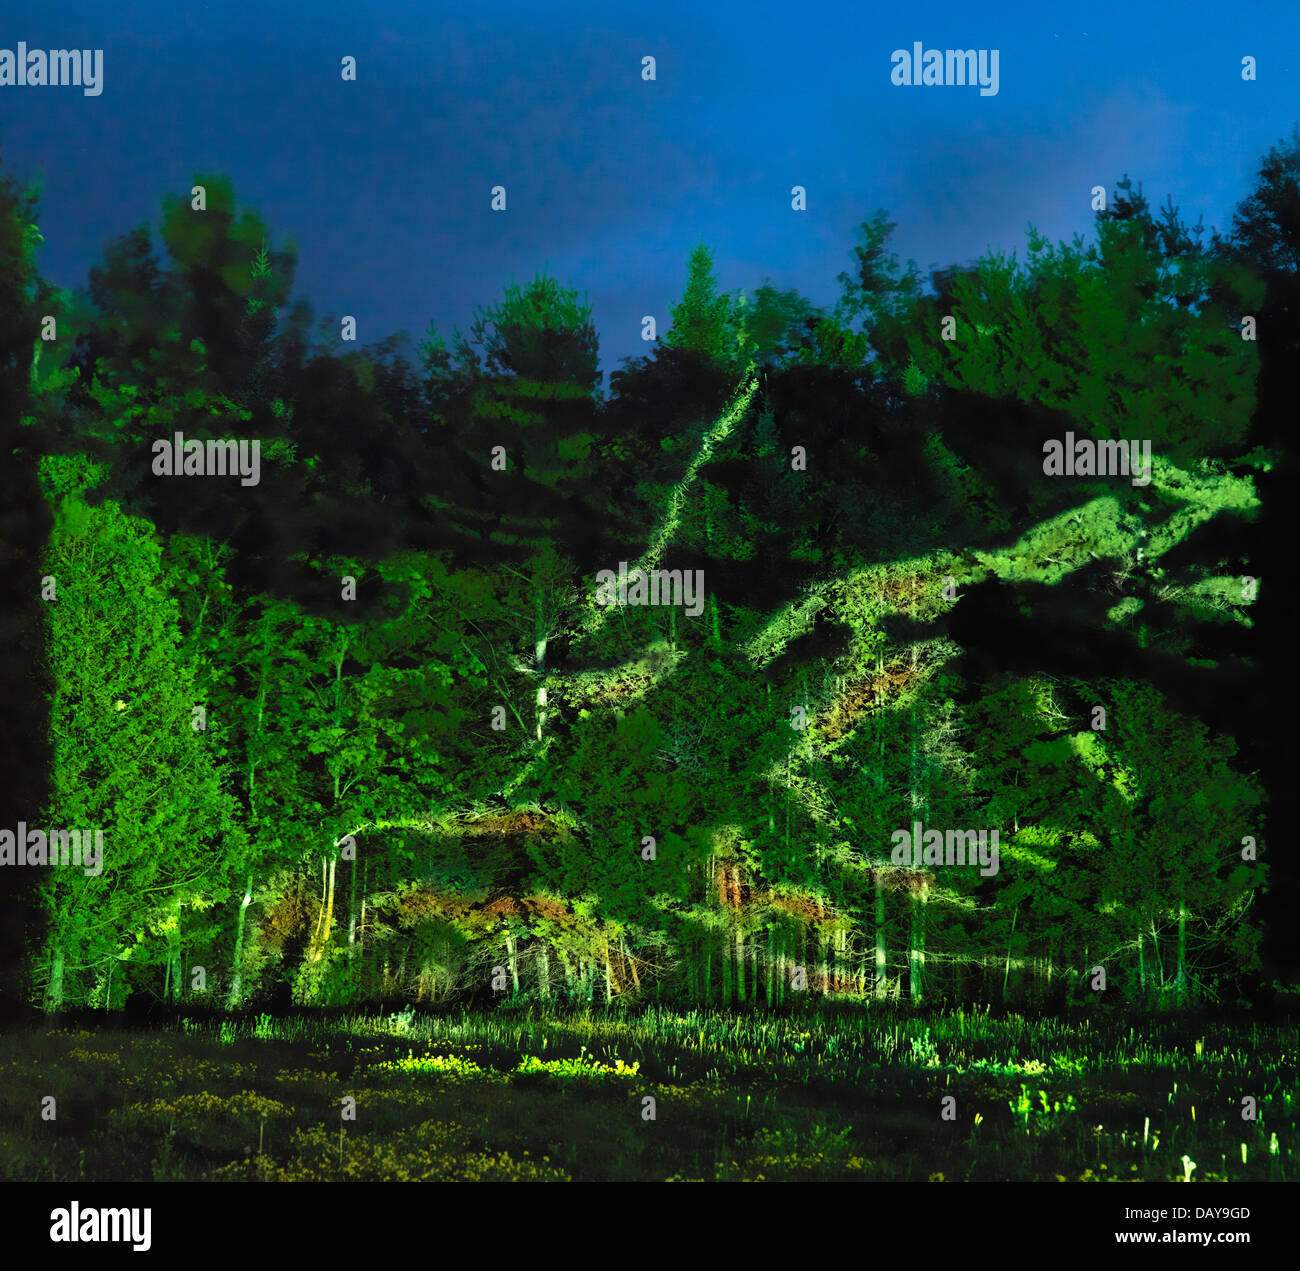 Abstract light projection on trees, beautiful abstract night nature scenery Stock Photo